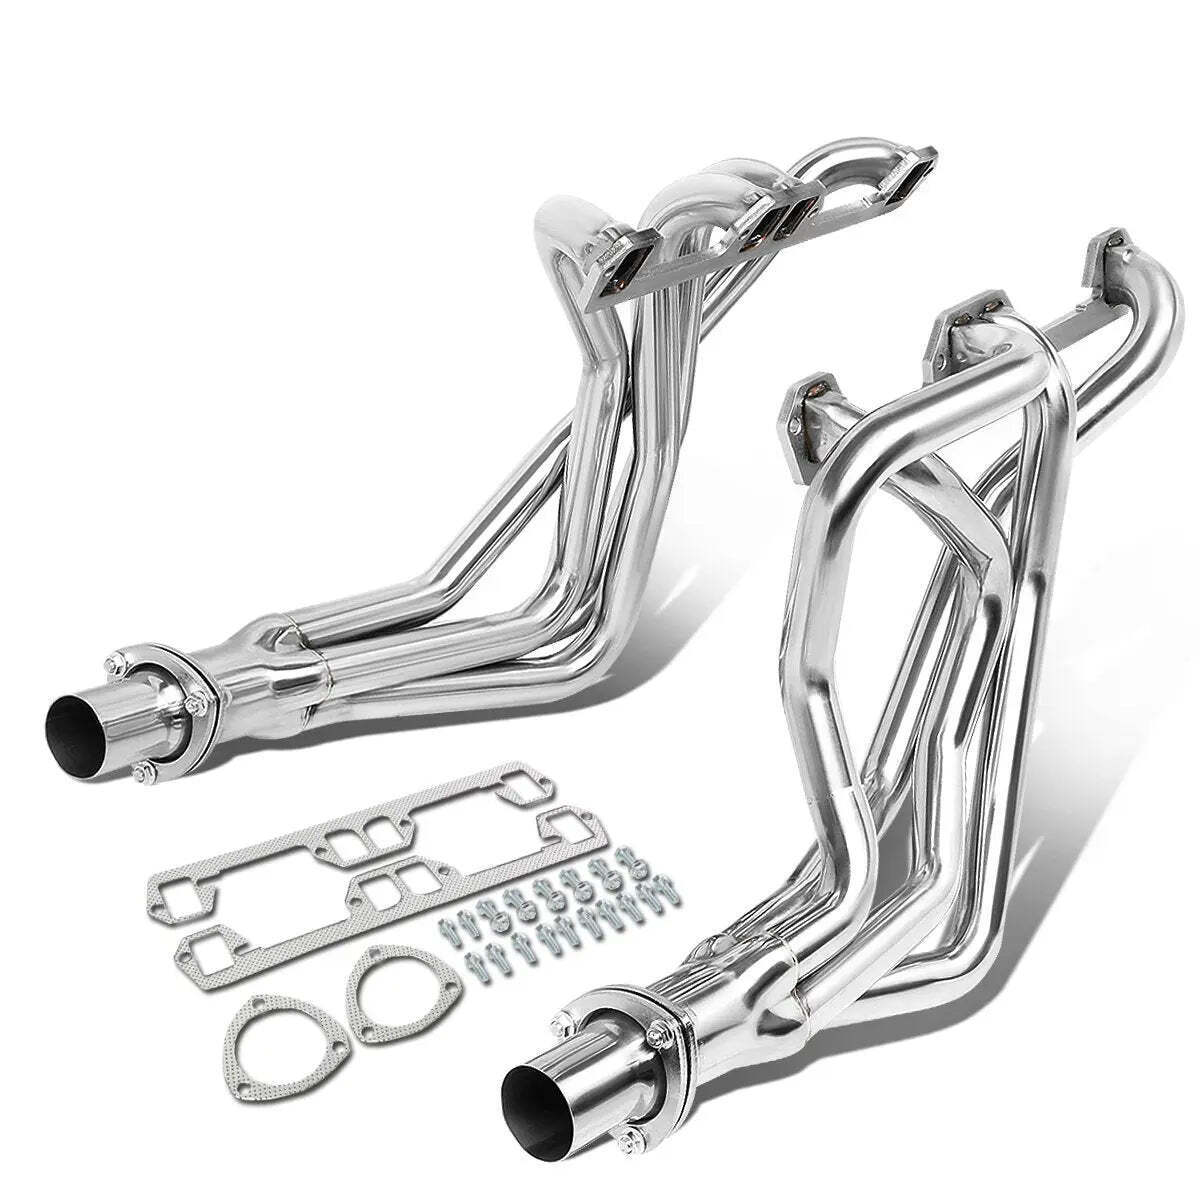 SS Exhaust Headers For 72-93 Dodge D/W Truck 5.2L 5.9L & Plymouth Trailduster V8